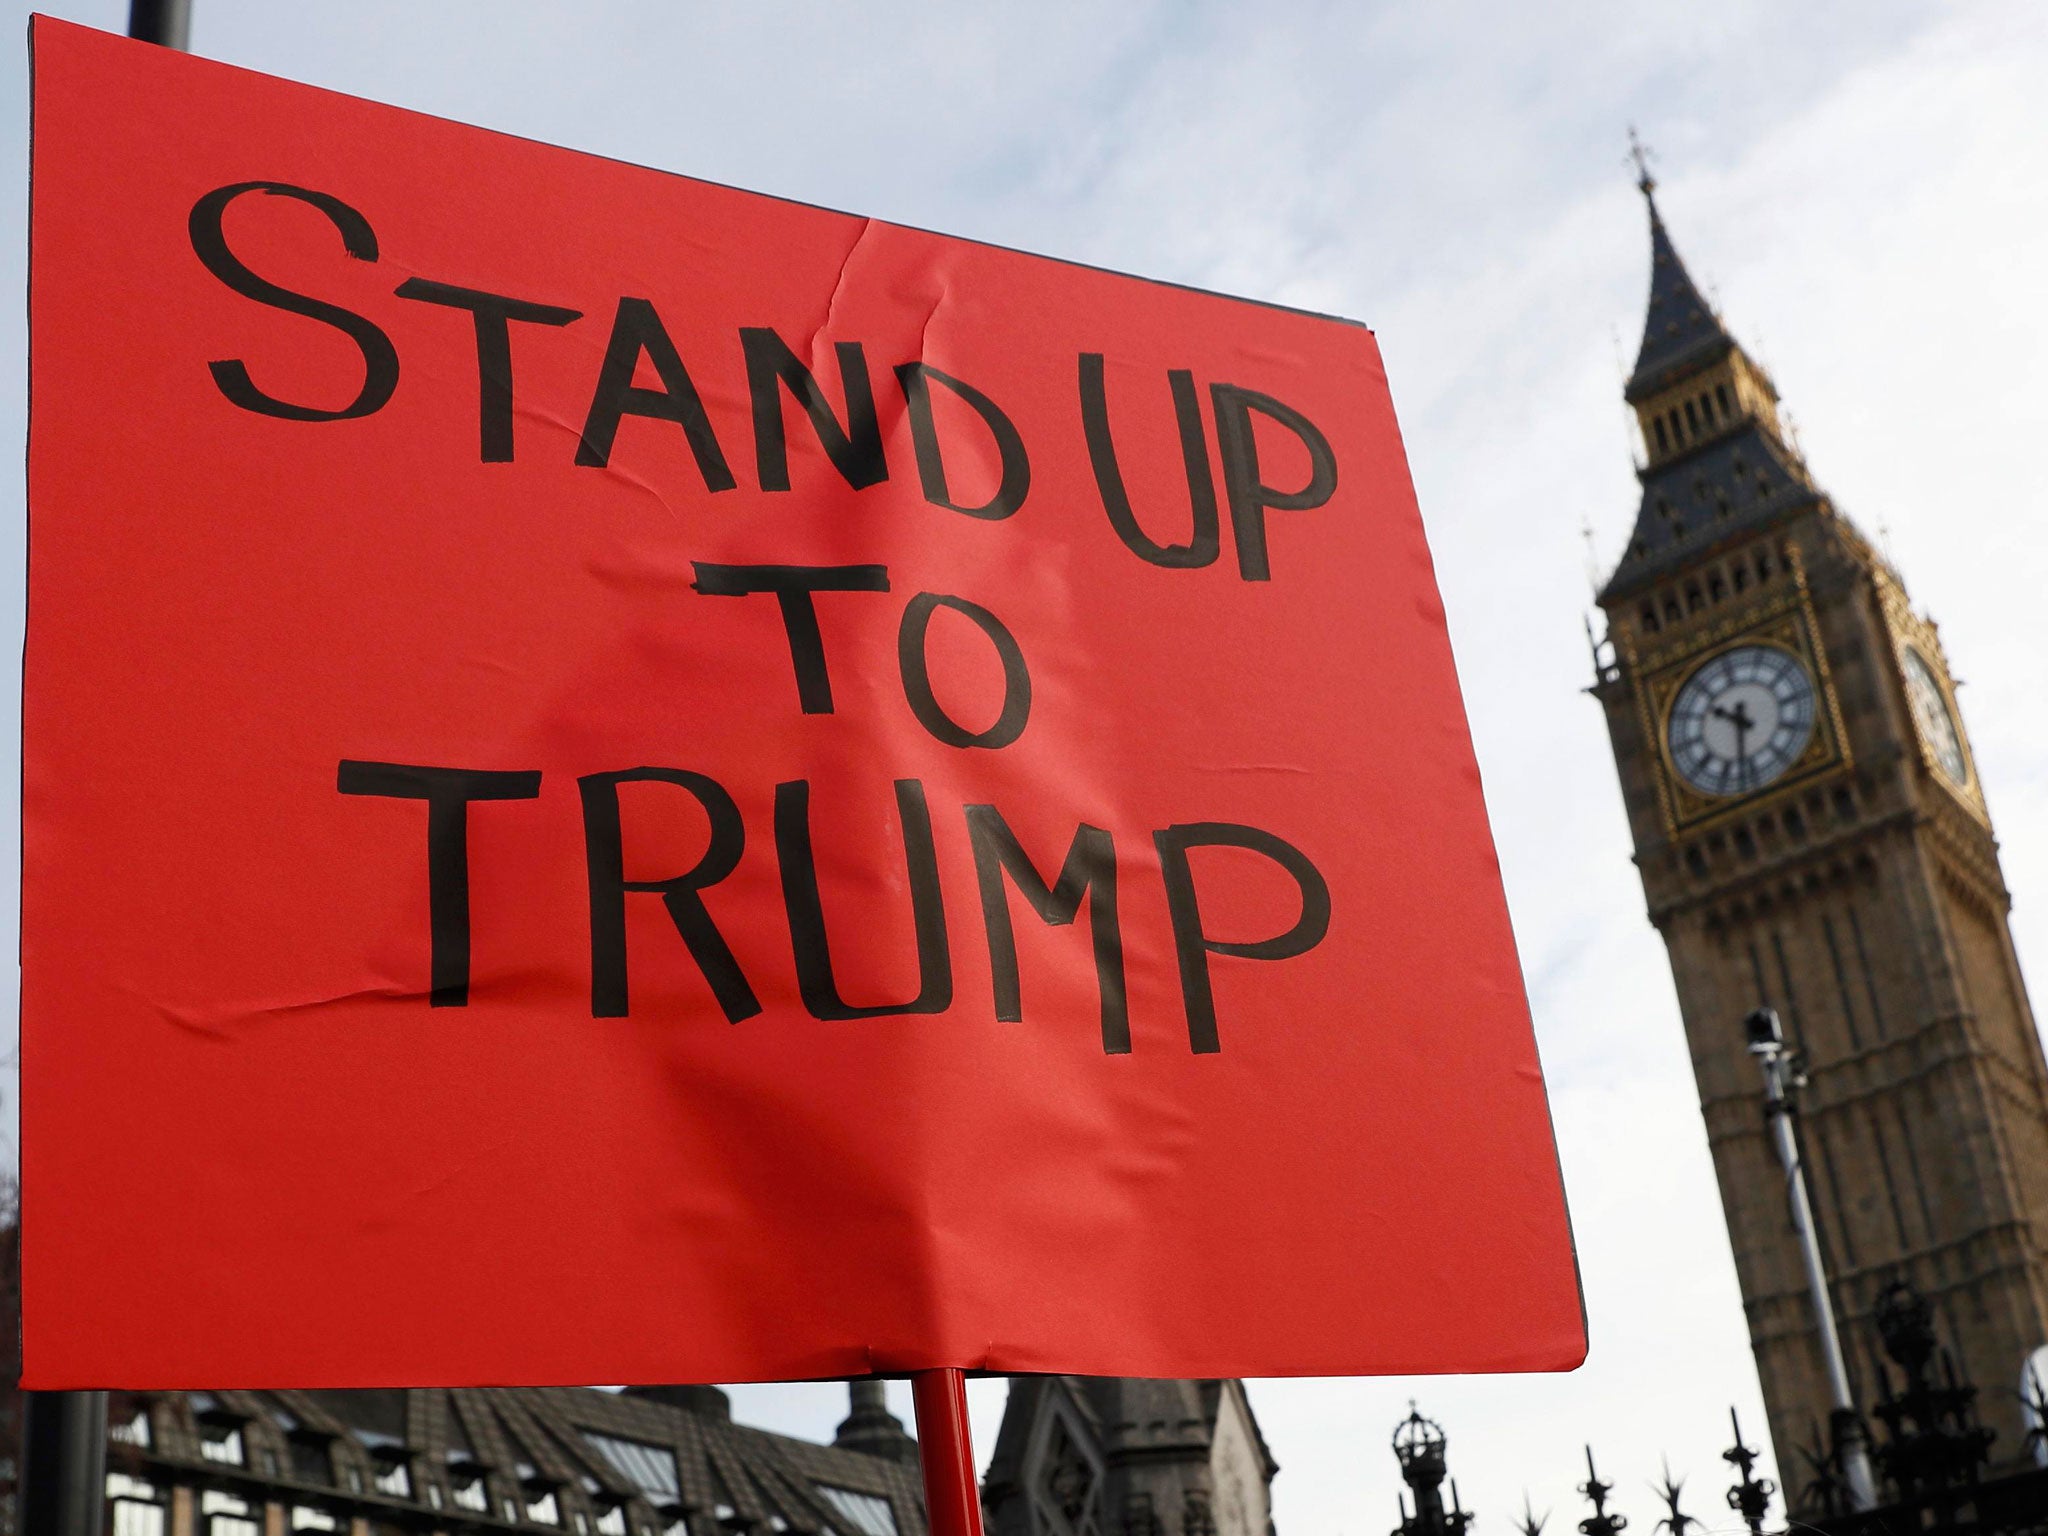 Organisers of an anti-Trump group claim 'more than a million' people are ready to take to the streets if Donald Trump visits the UK